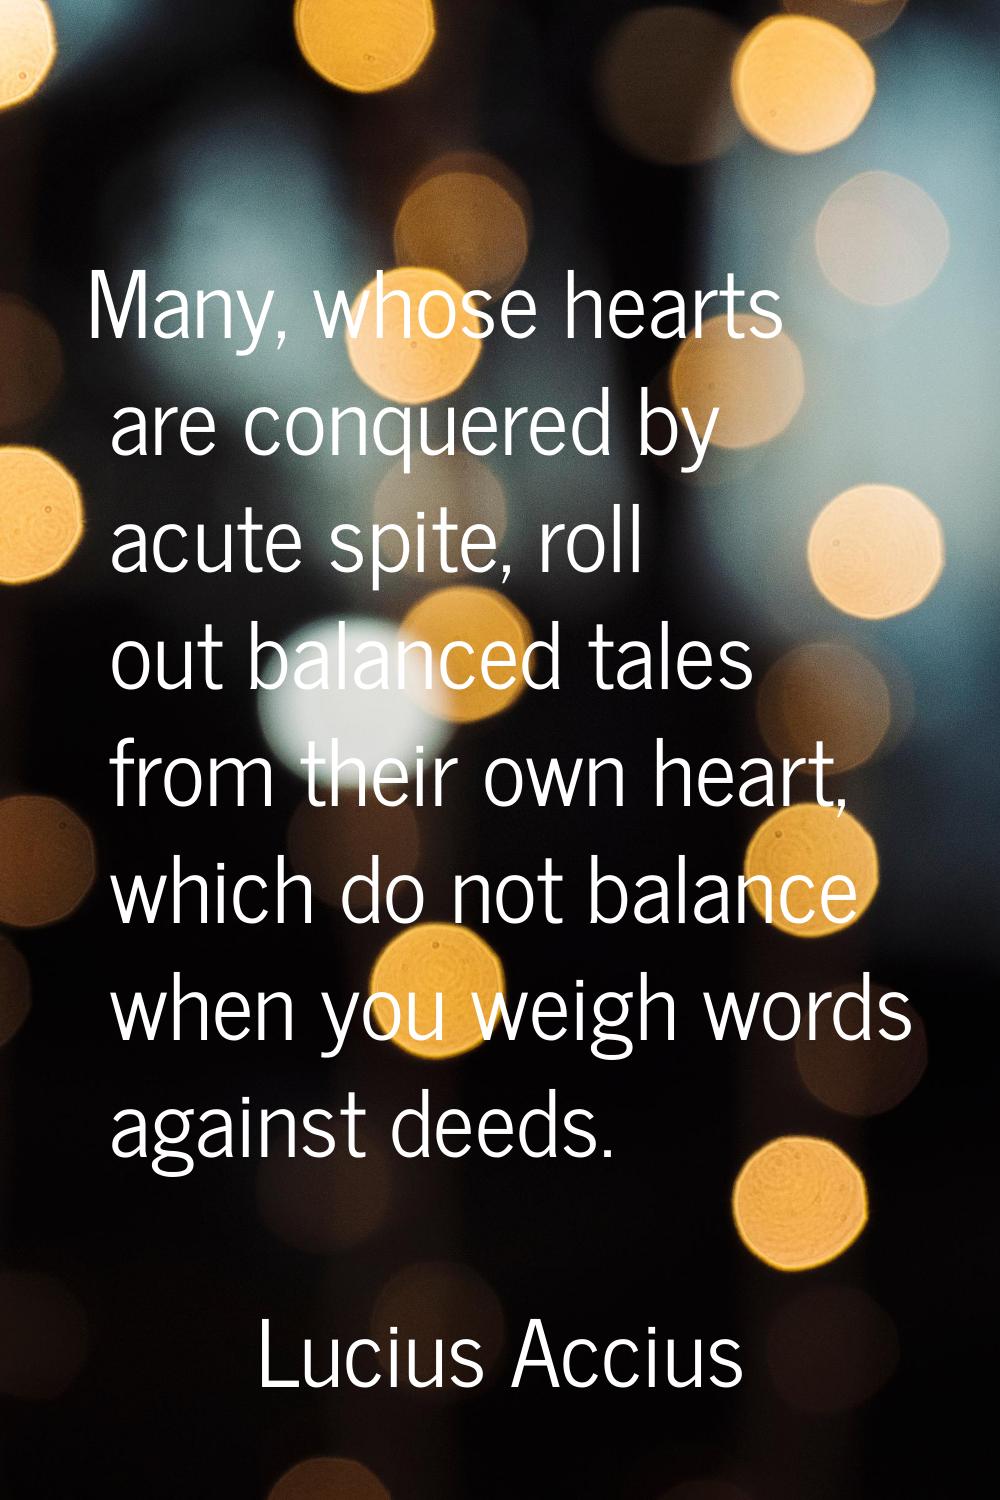 Many, whose hearts are conquered by acute spite, roll out balanced tales from their own heart, whic